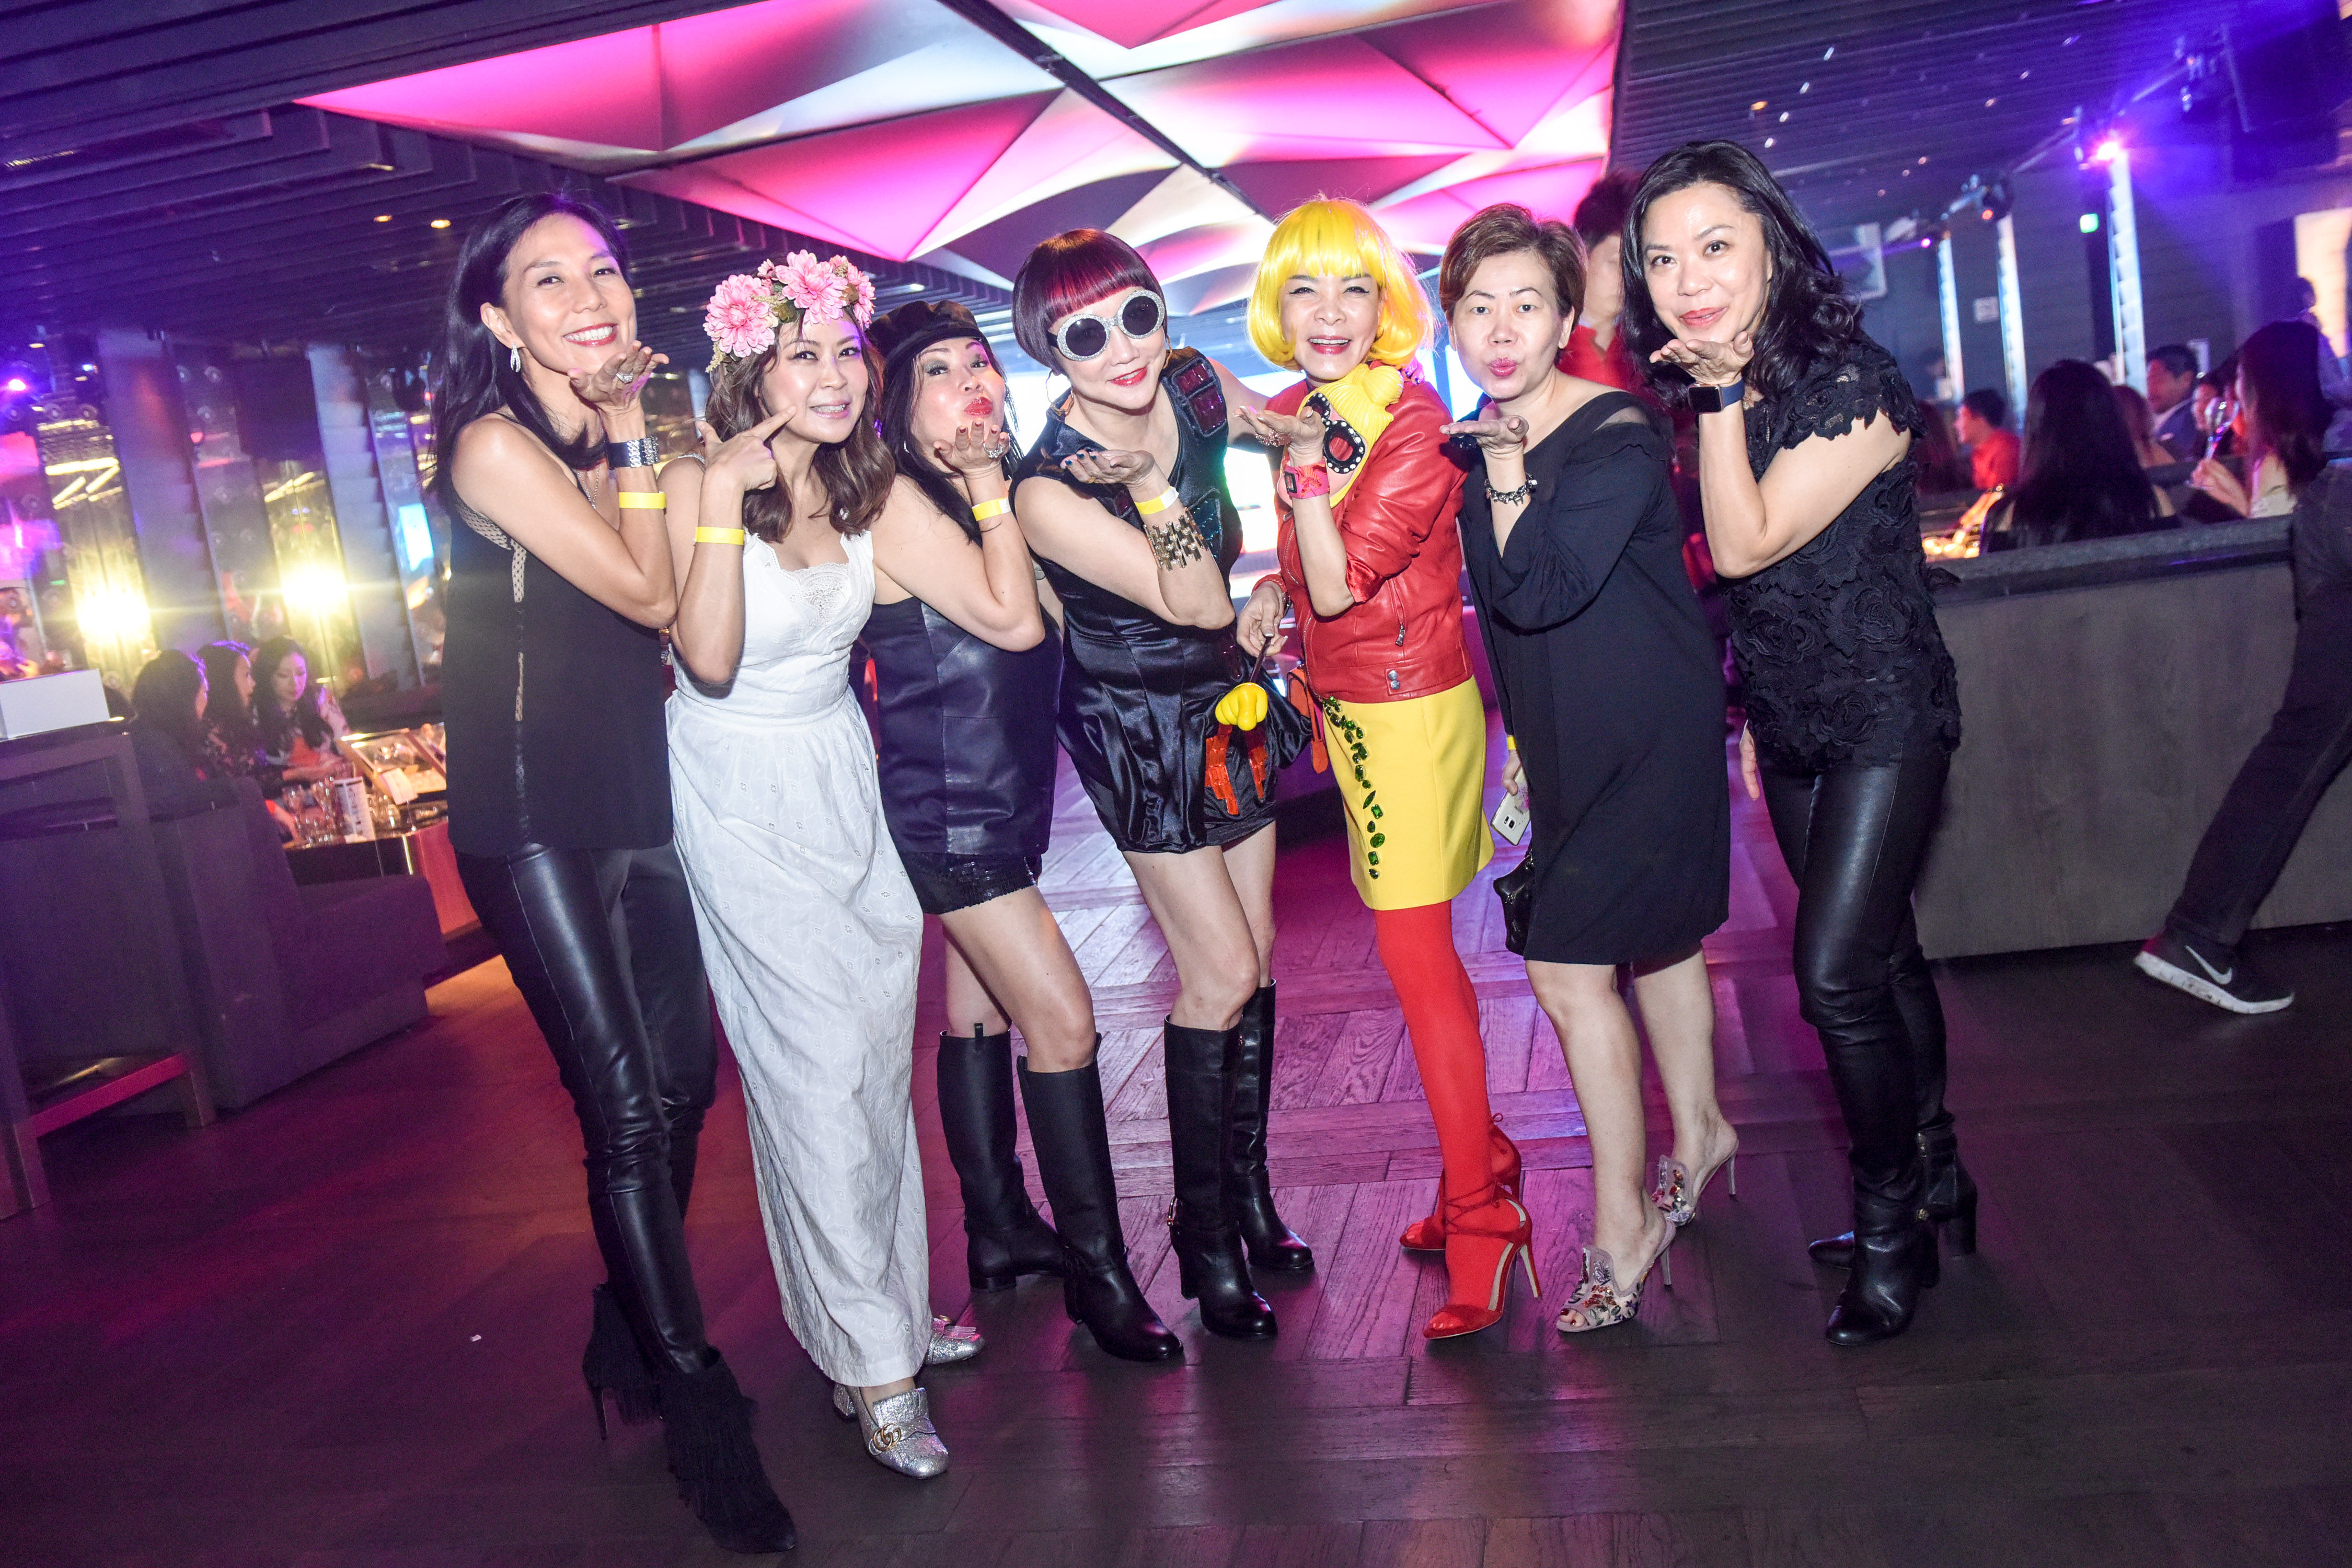 Legendary pop “icons” at our annual Yellow Brick Road charity party